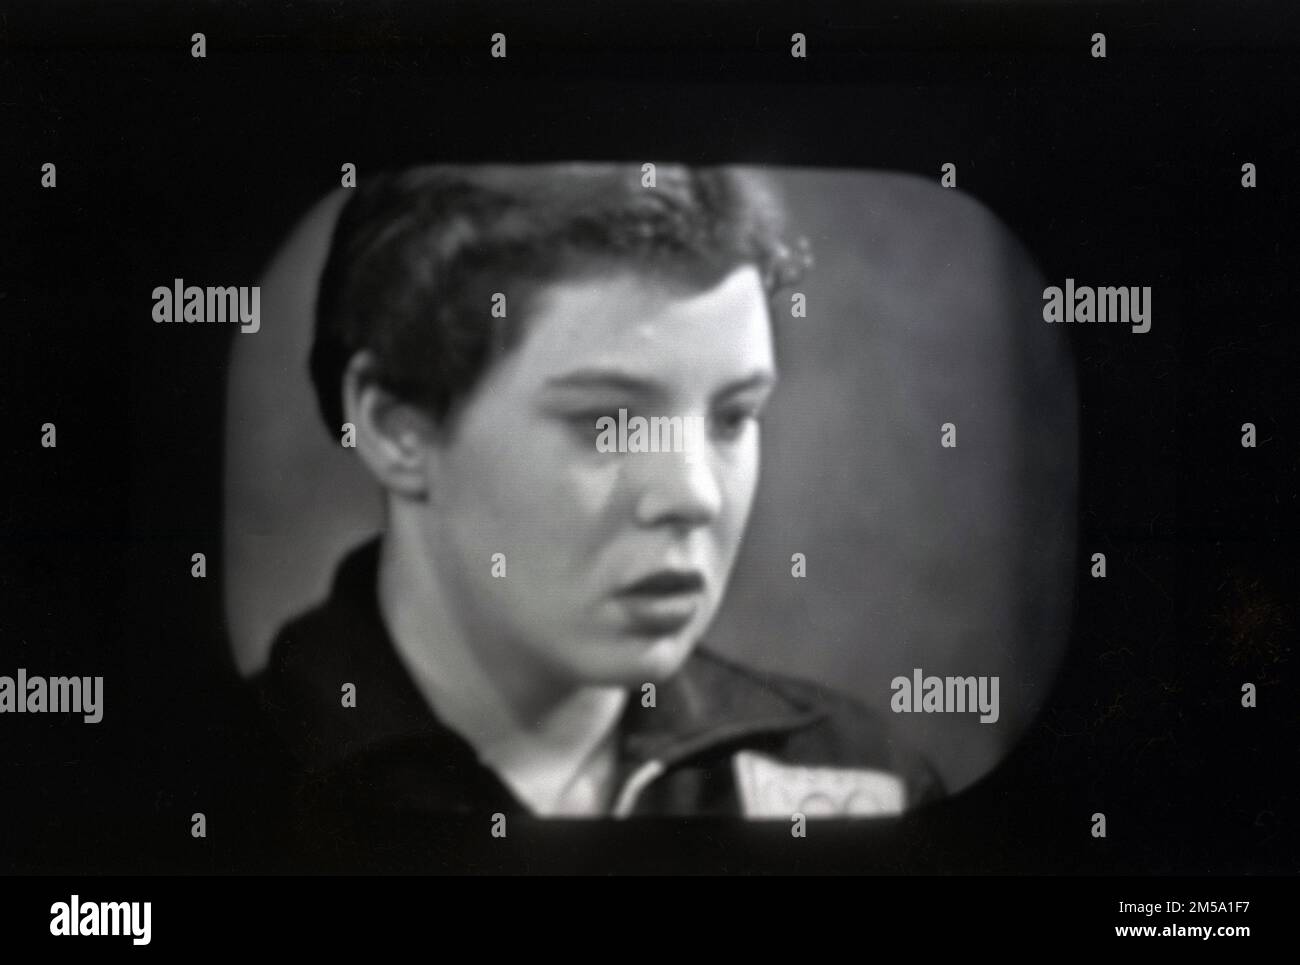 1950s, historical, the English swimmer Judy Grinham on televison. Grinham won the 100-metre backstroke at the 1956 Olympic Games, the first British swimmer to win a swimming gold medal since 1924. In 1958 she was the British Sportswoman of the year, having become the first woman in any sport to win Olympic, European and Commonwealth gold medals. Stock Photo